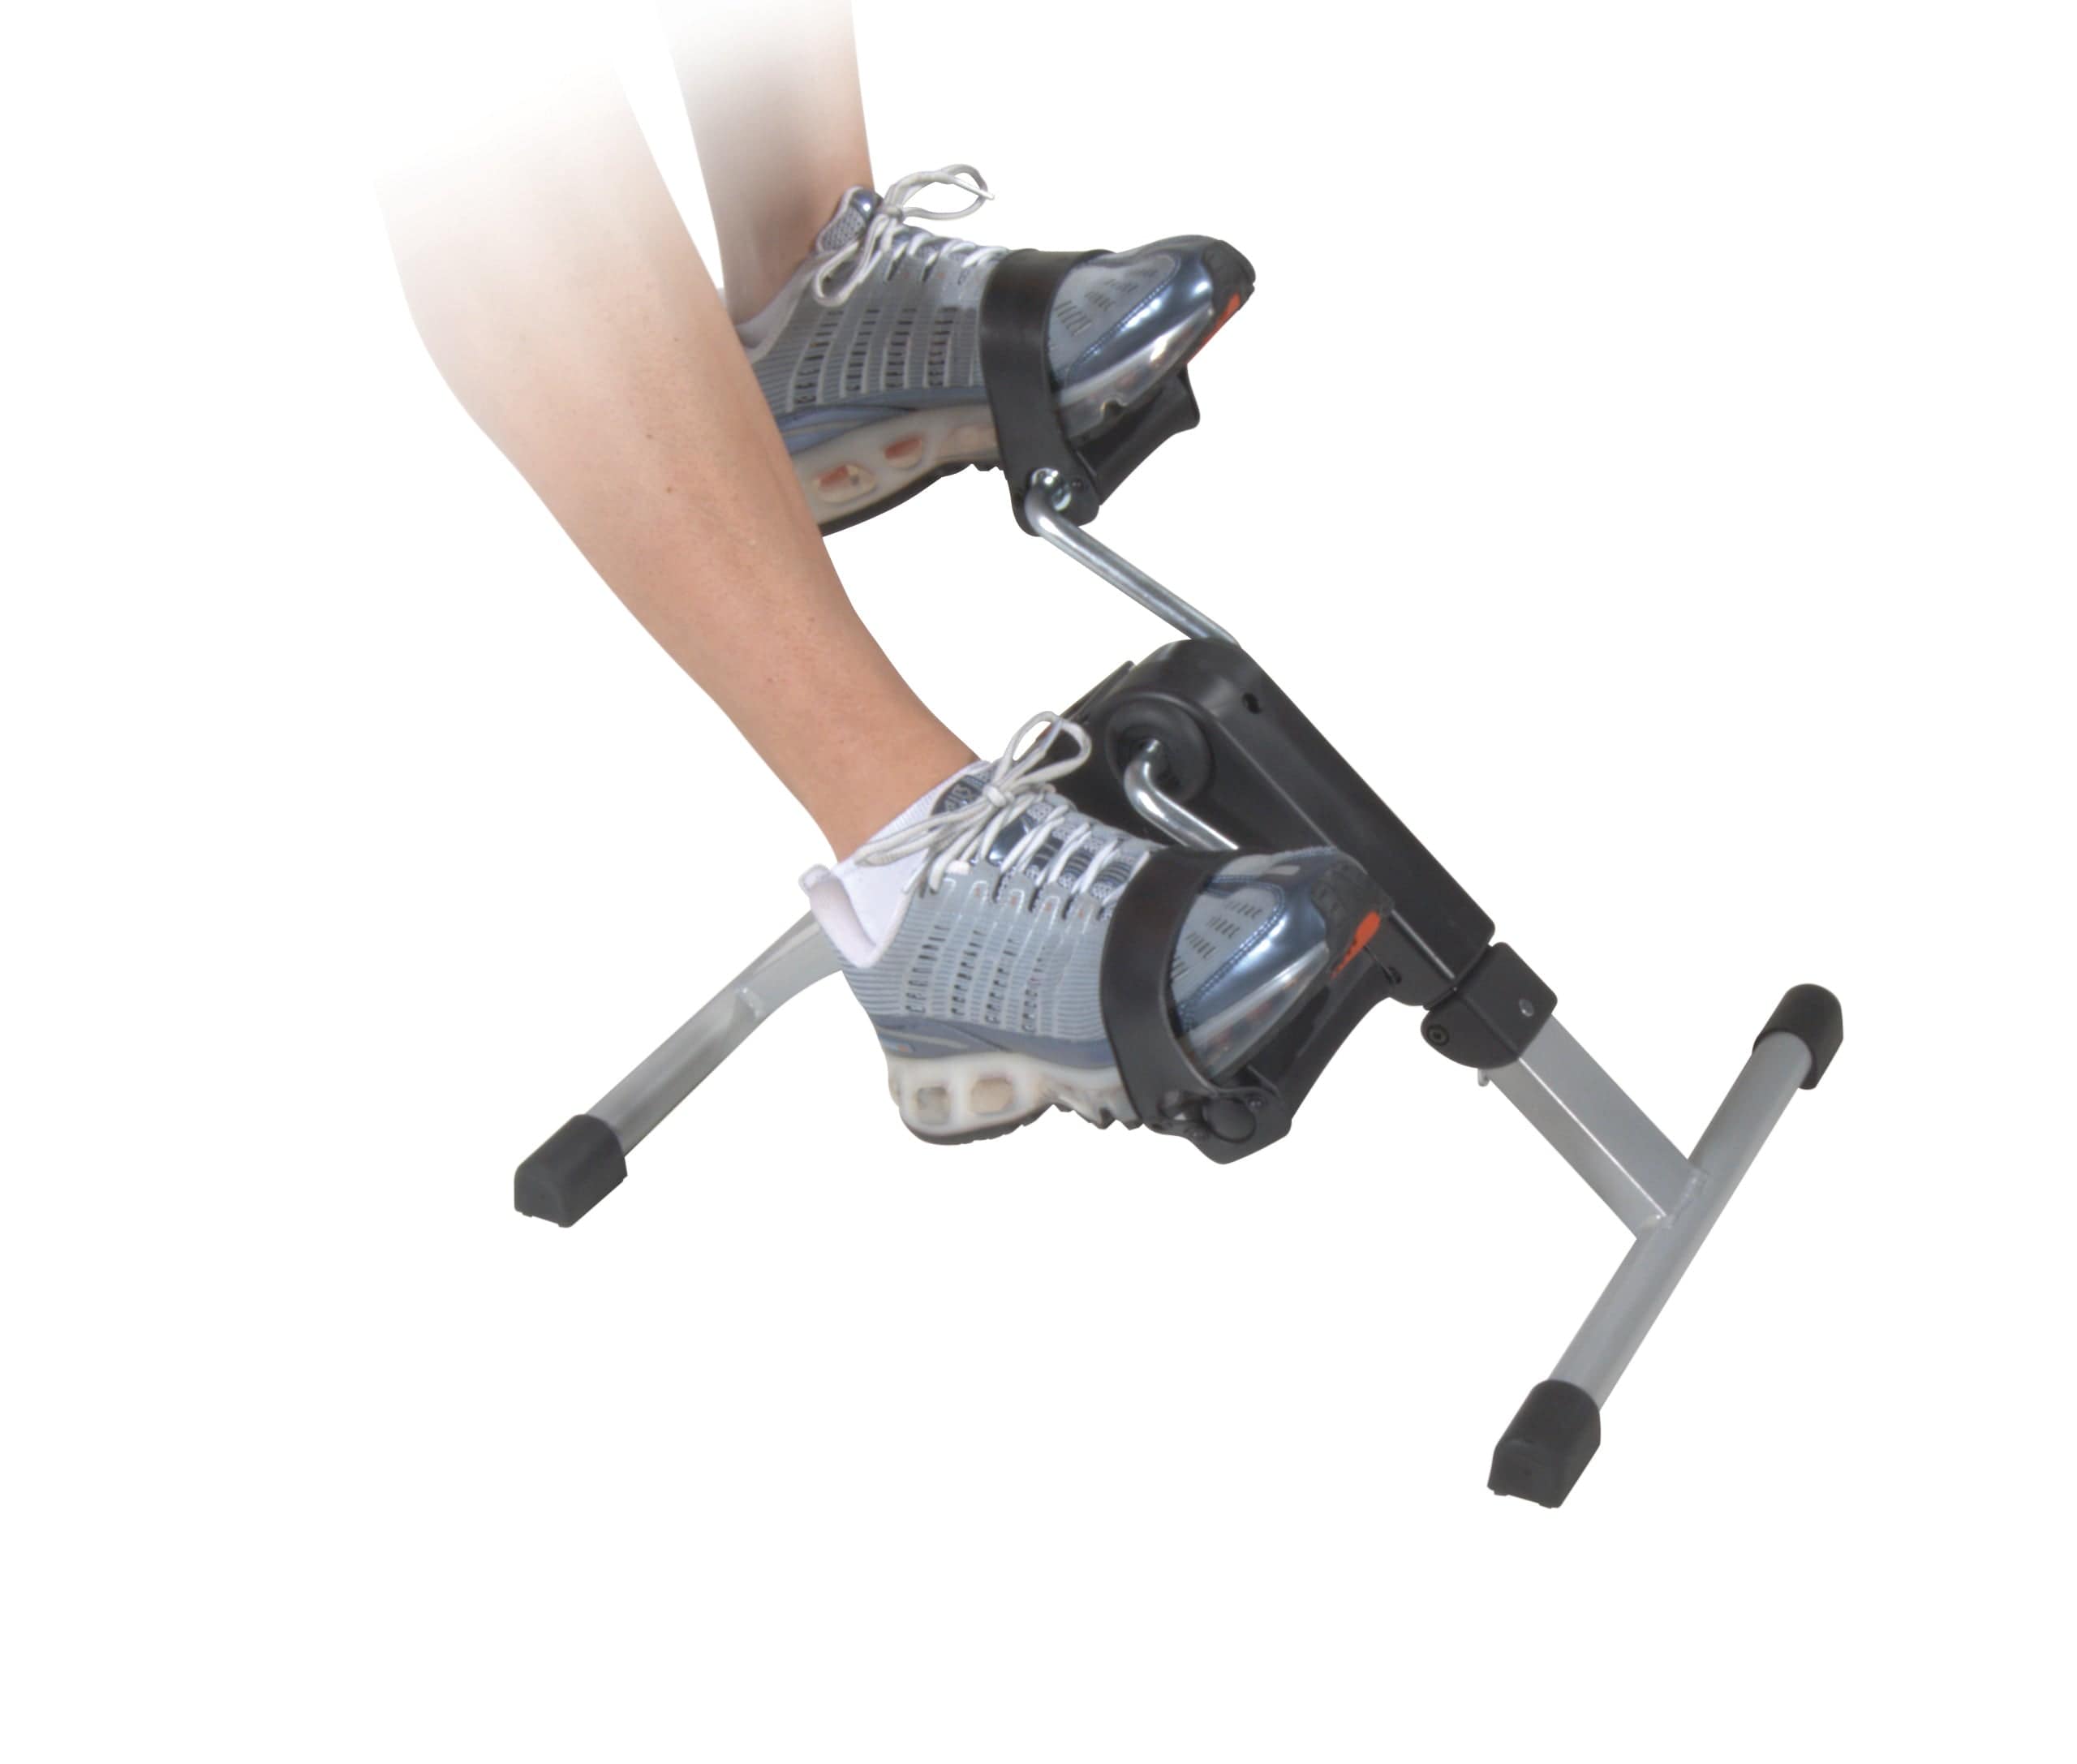 Drive Medical Drive Medical Folding Exercise Peddler with Electronic Display, Black rtl10273